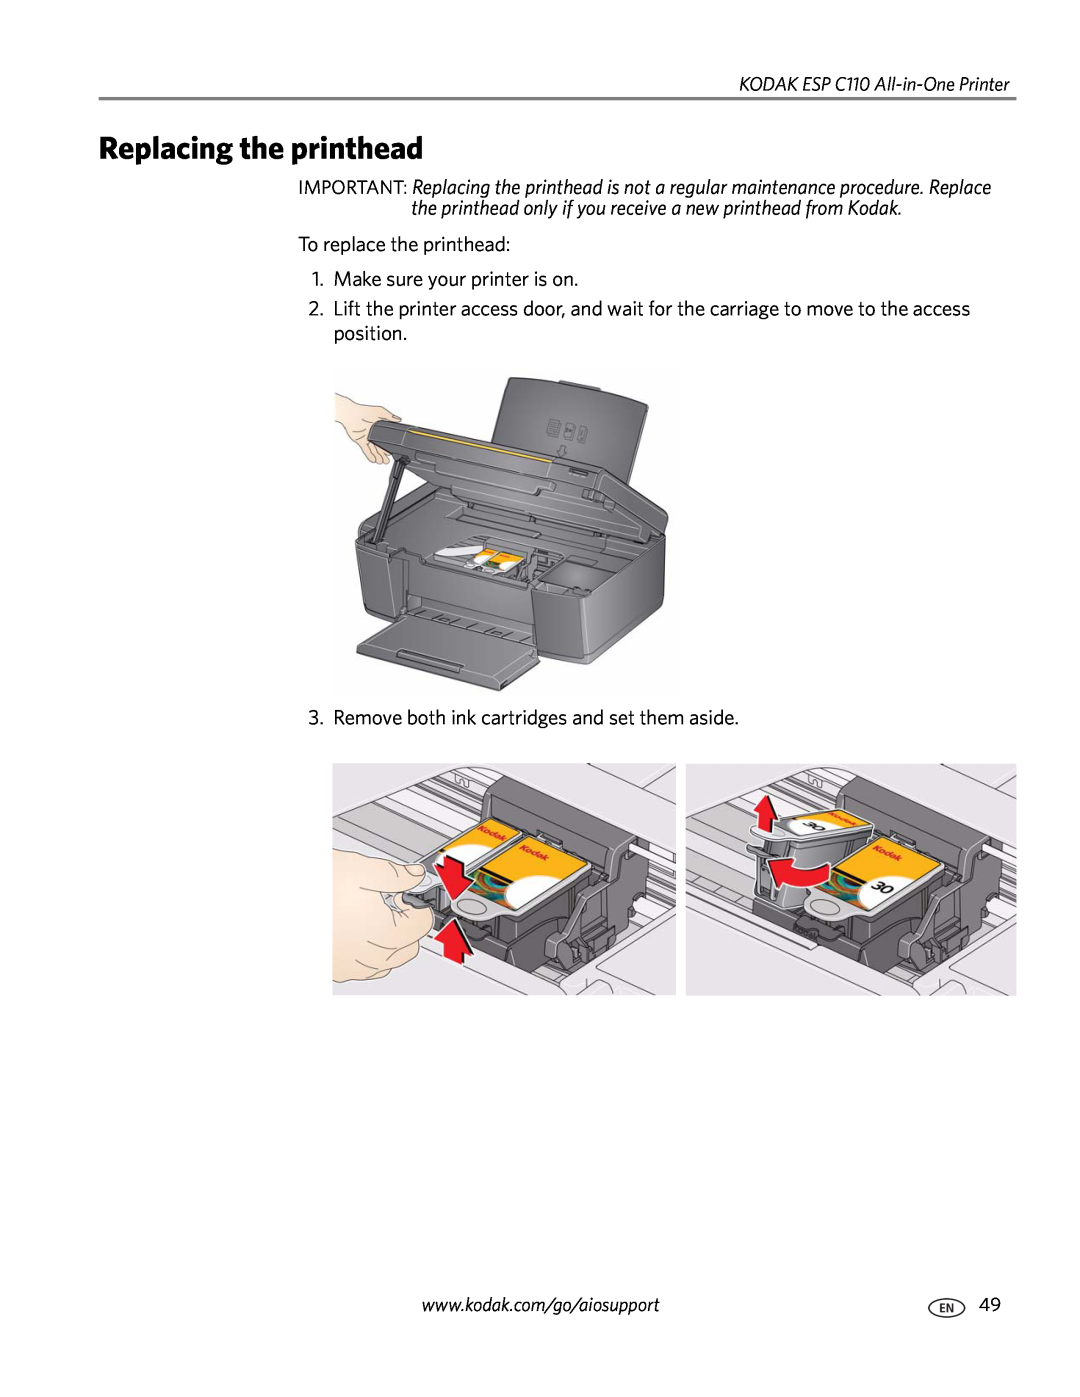 Kodak C110 manual Replacing the printhead, To replace the printhead 1. Make sure your printer is on 